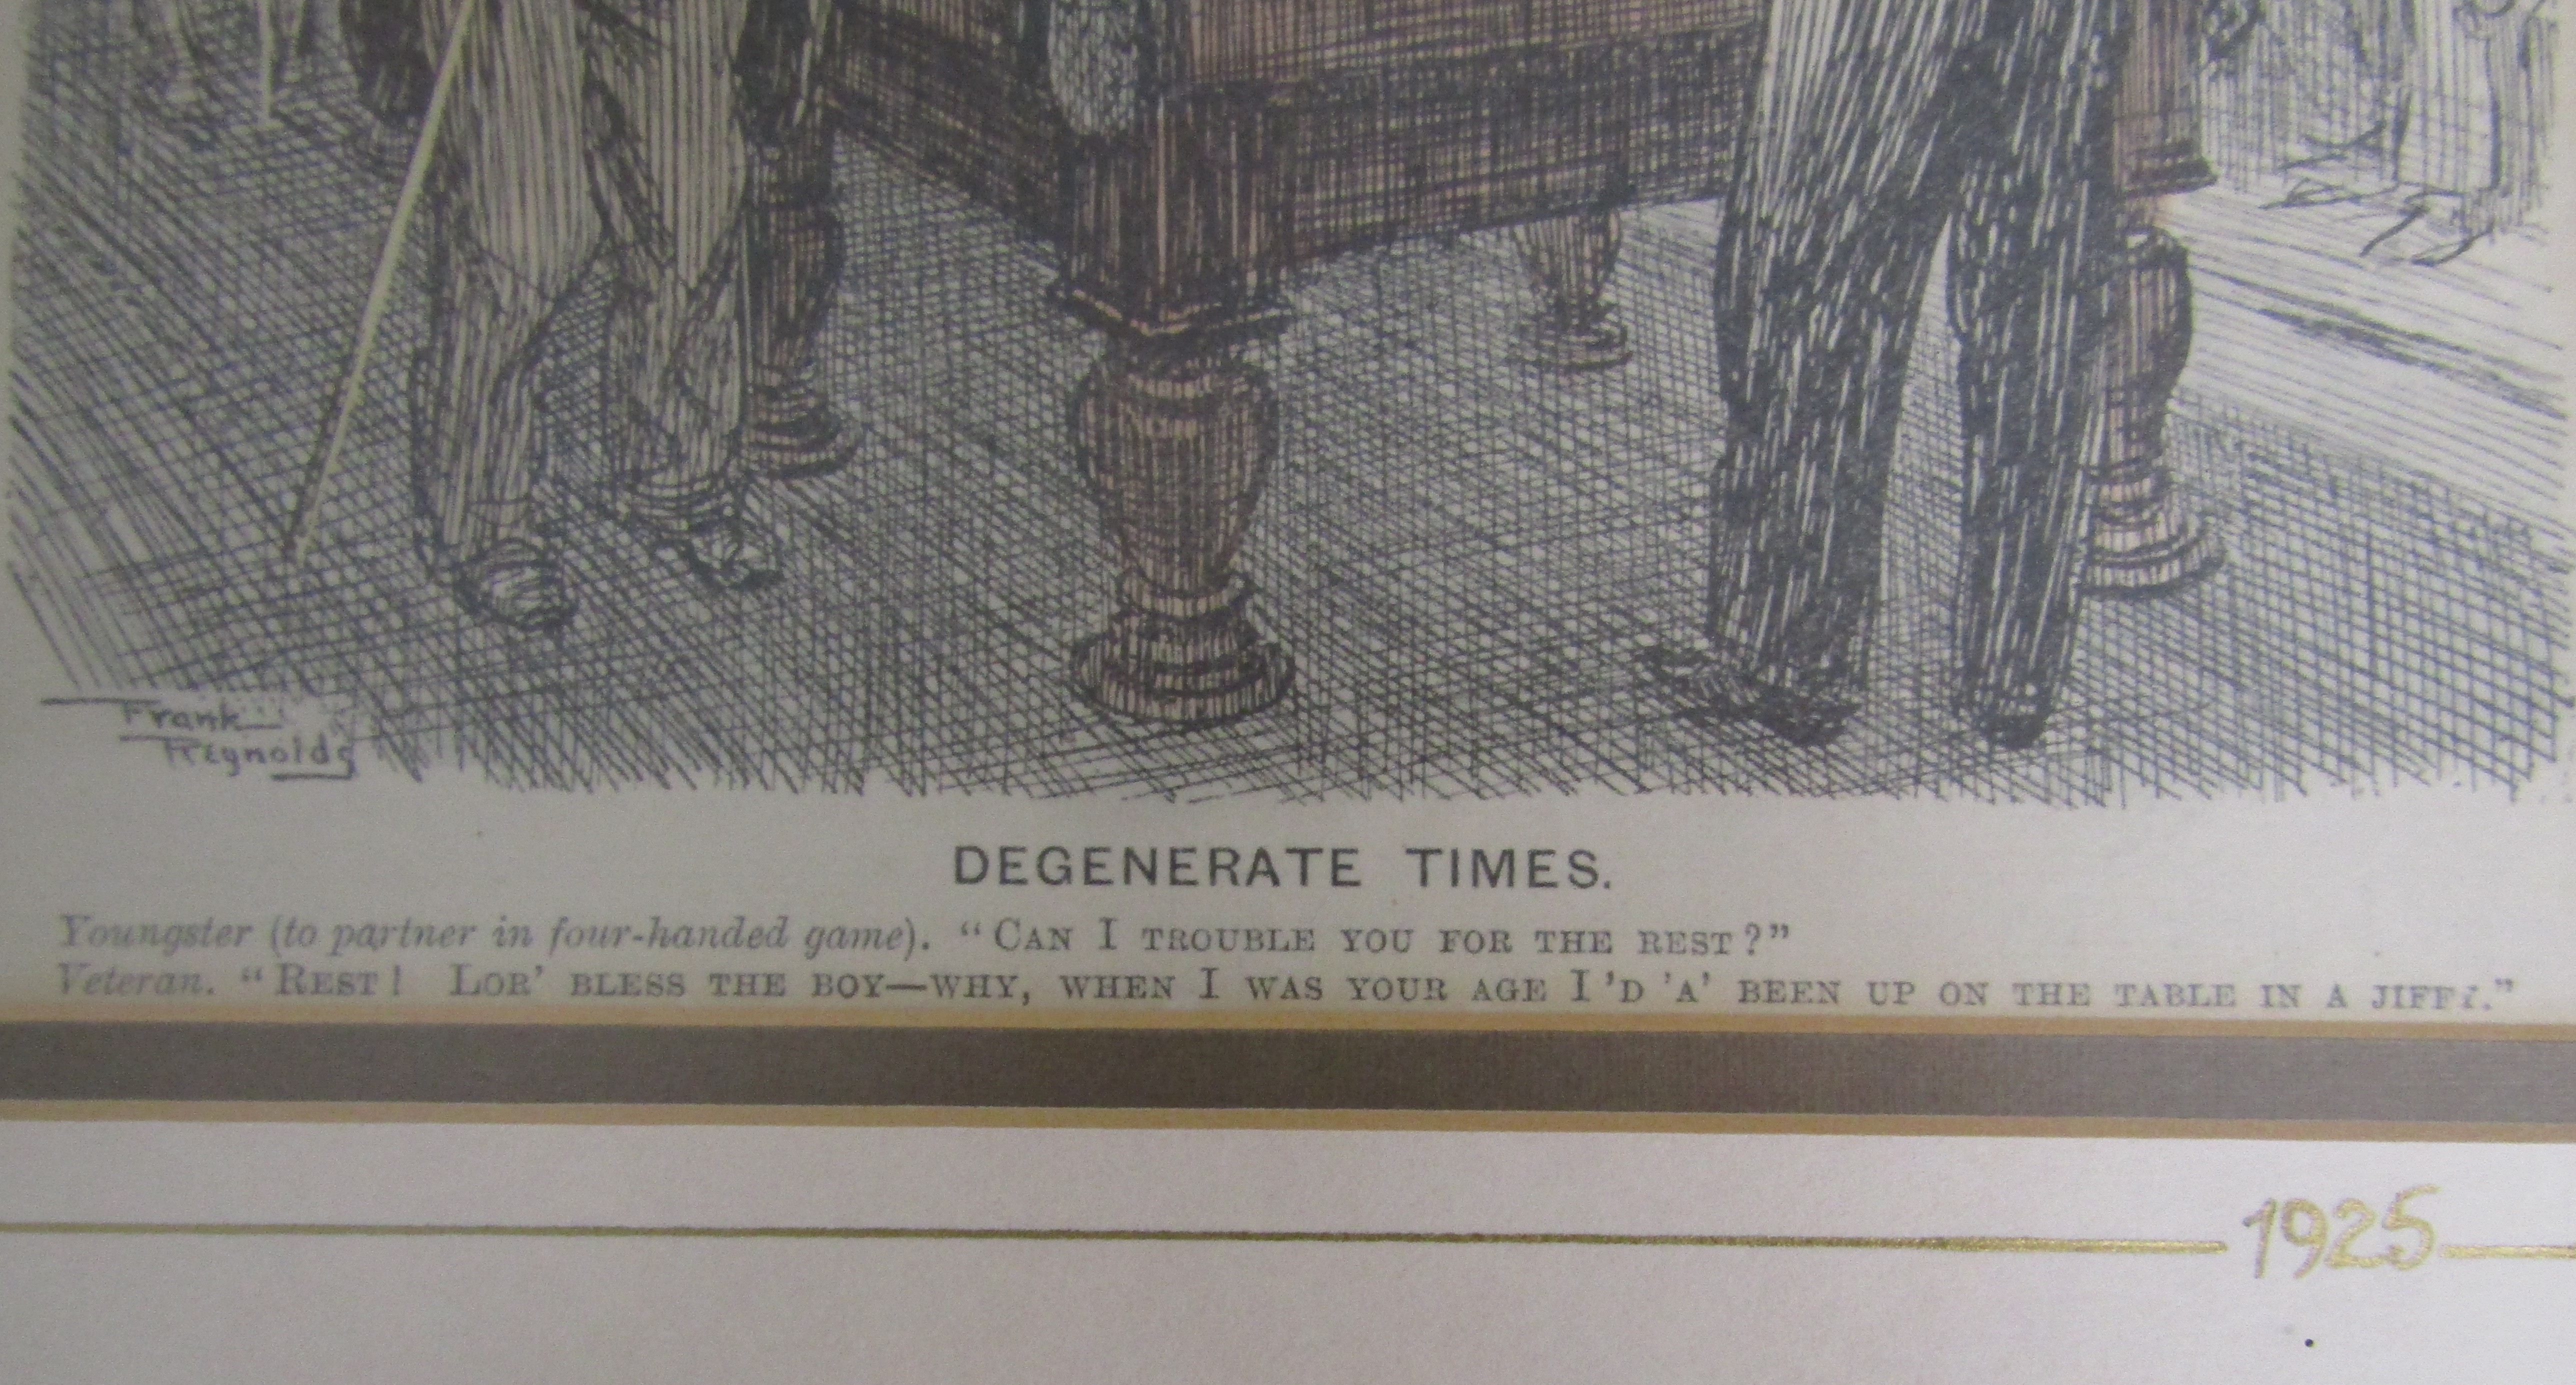 Snooker prints - Frank Reynolds 'Degenerate Times, Shepperson? 'Manners Modes', Riley's Billiard - Image 3 of 9